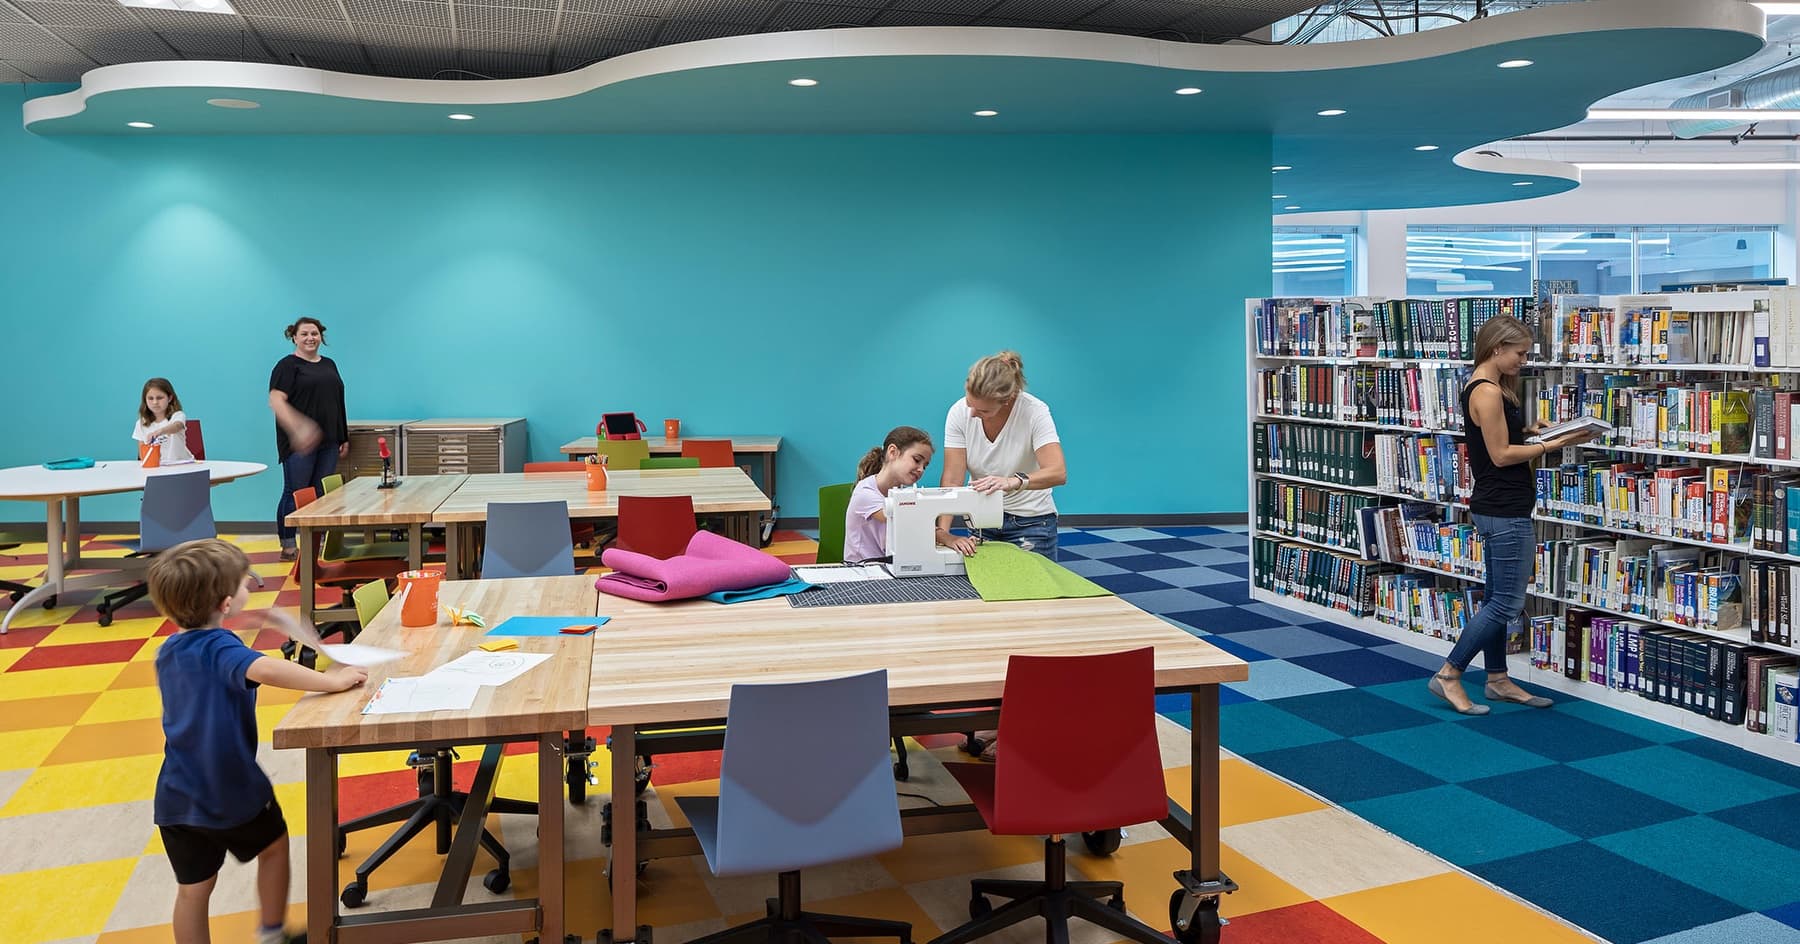 Libraries have become maker spaces for their community, Boudreaux architects design a space for people to create and feel inspired